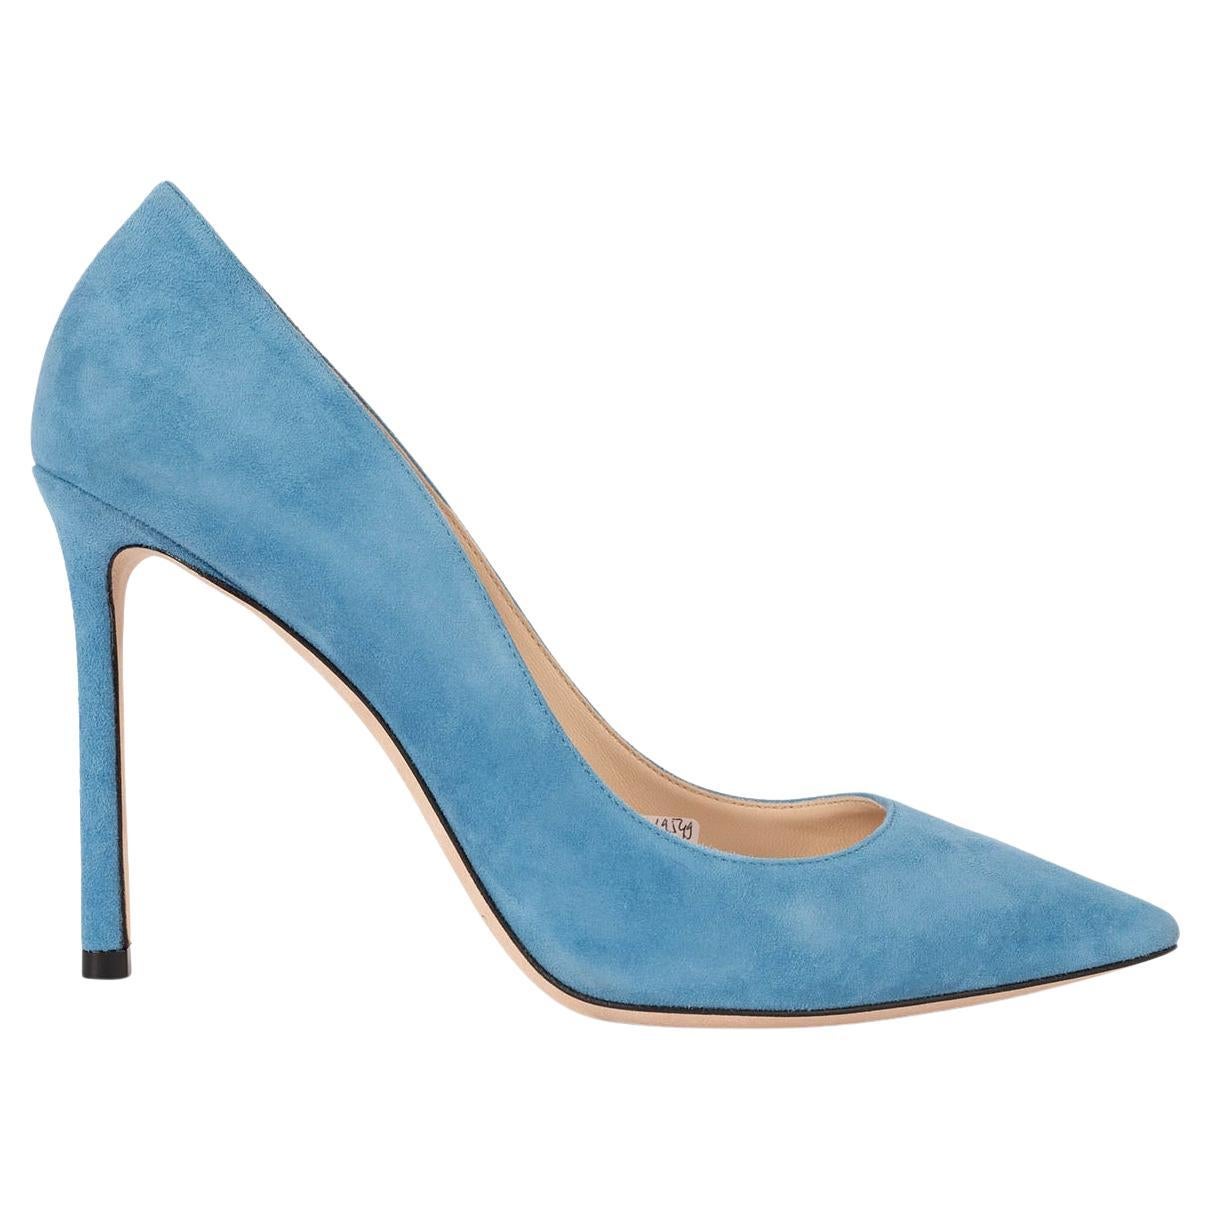 JIMMY CHOO Robot blue suede ROMY 100 Pumps Shoes 38.5 For Sale